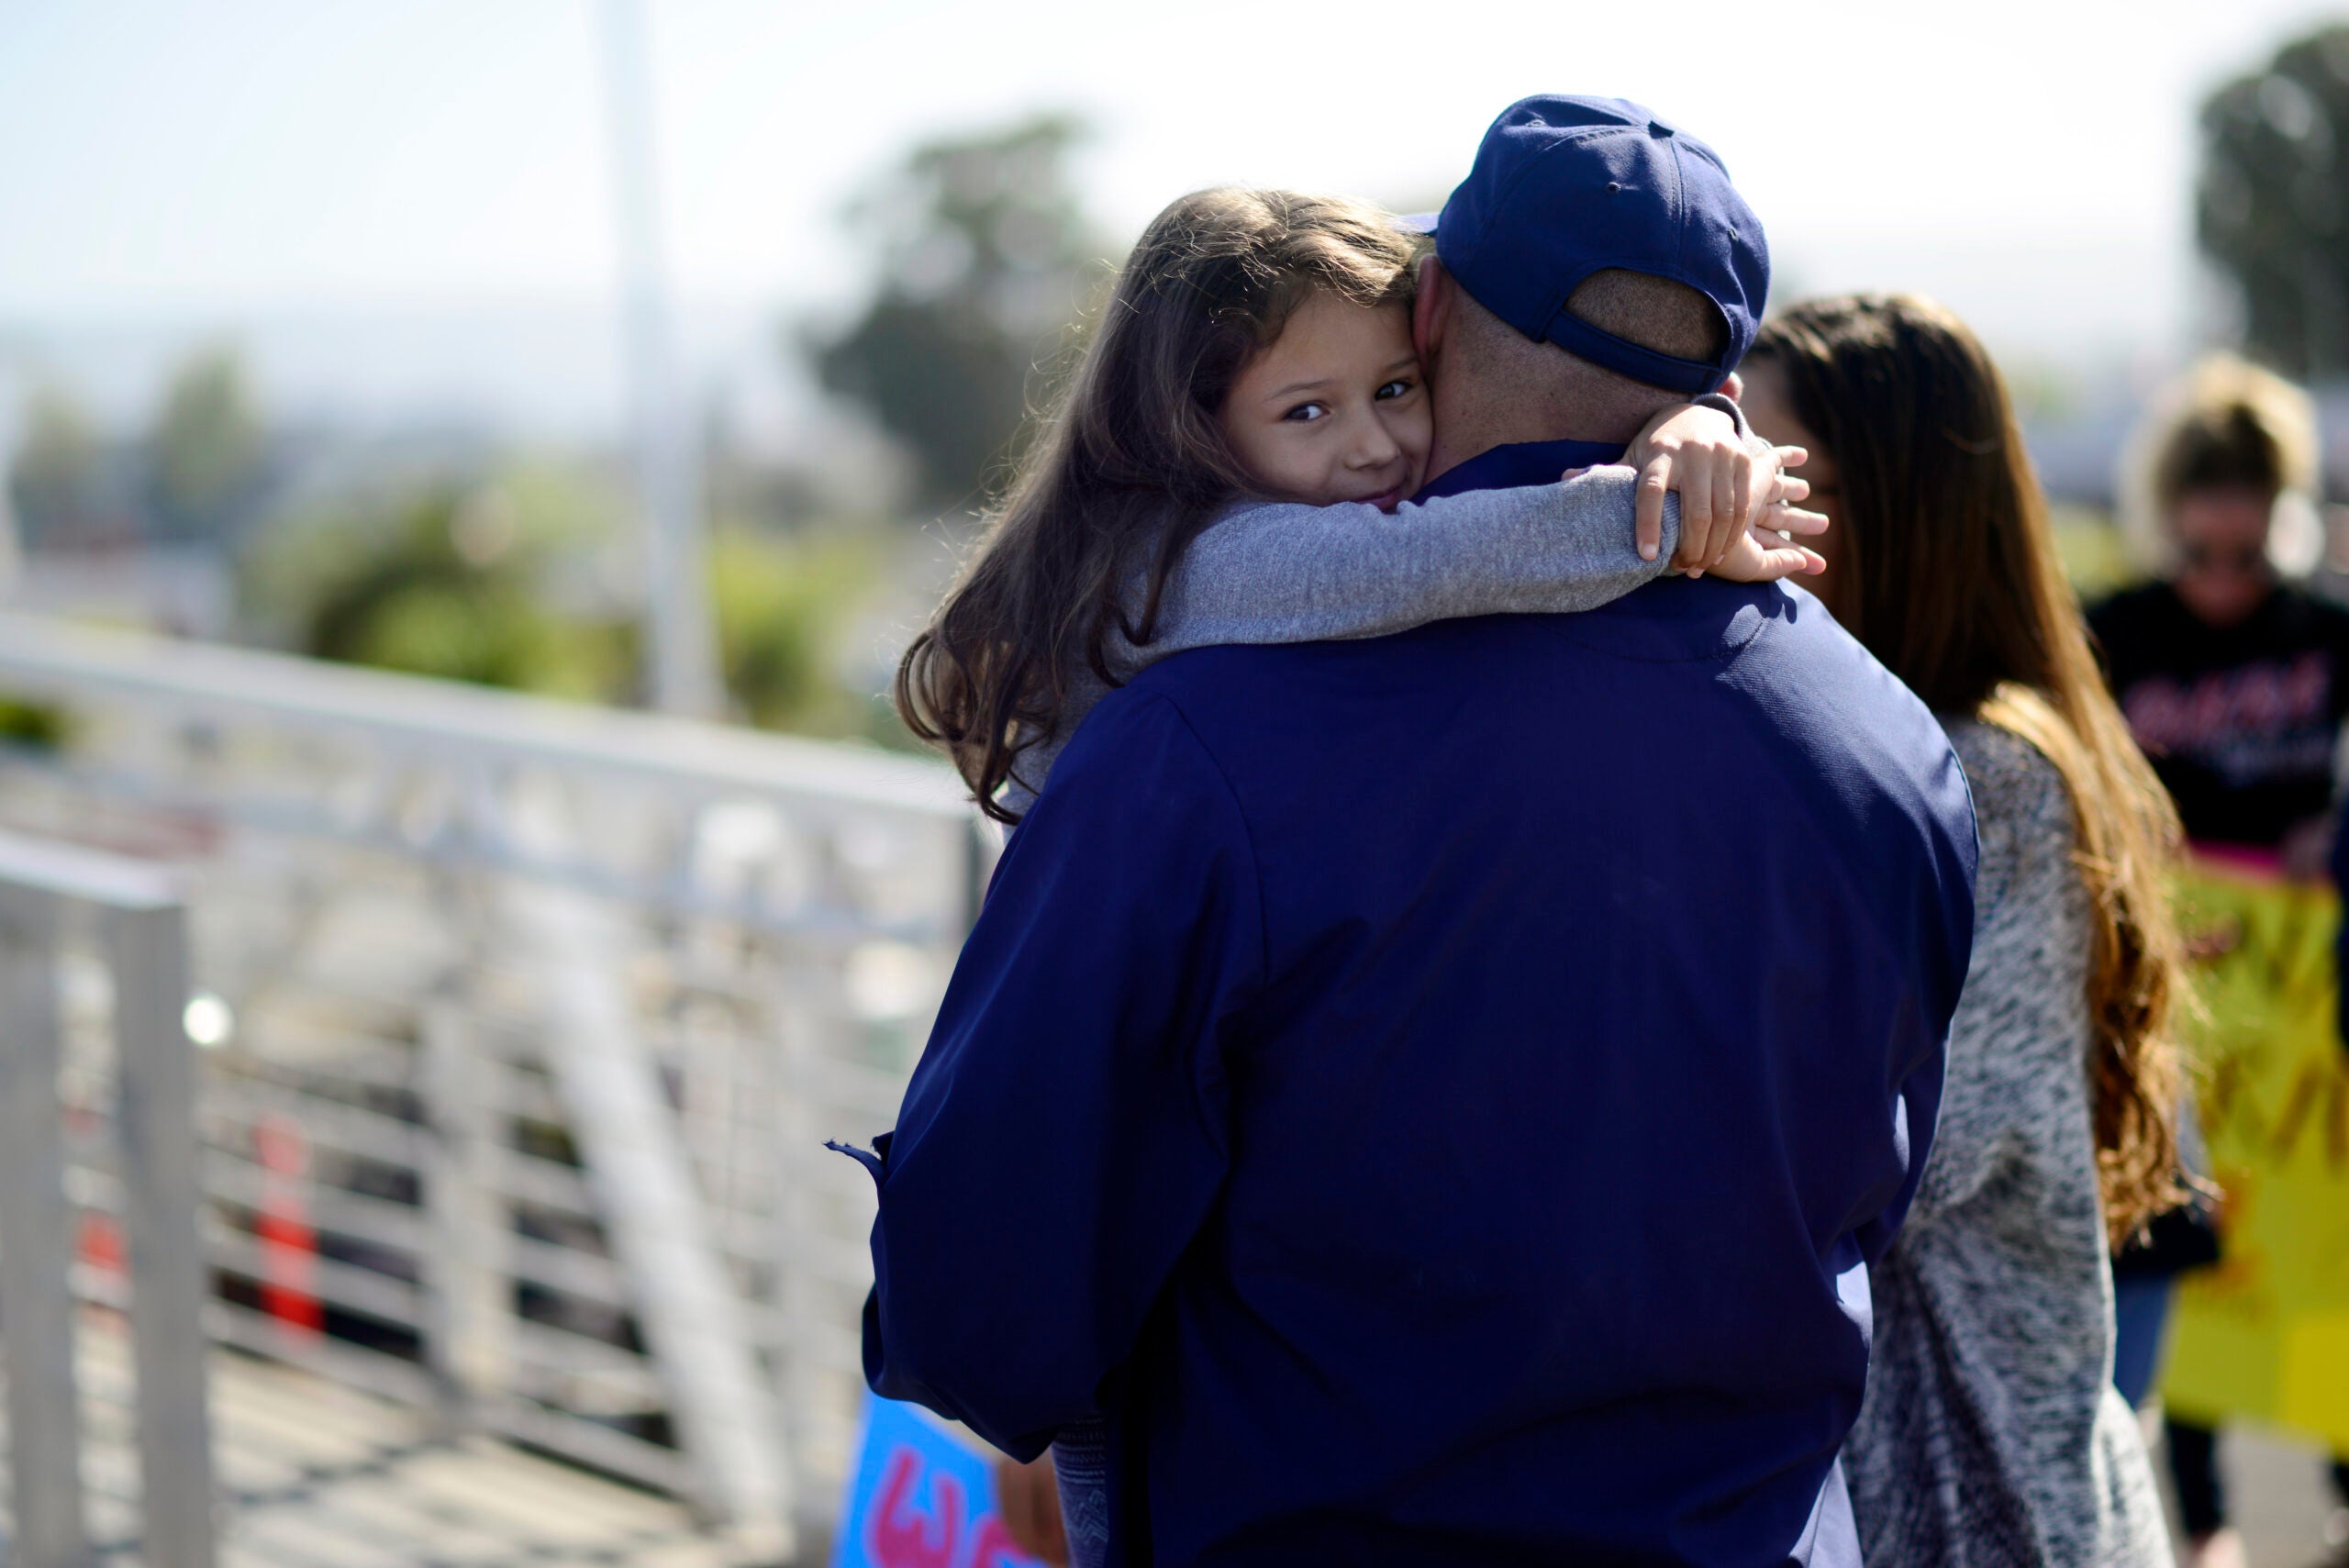 A father embraces his daughter after she embarks on the Coast Guard Cutter Stratton April 2, 2017, on Coast Guard Island in Alameda, Calif. The Stratton returned home after offloading approximately 12,000lbs of cocaine in San Diego before returning home. U.S. Coast Guard photo by Petty Officer 3rd class Adam Stanton